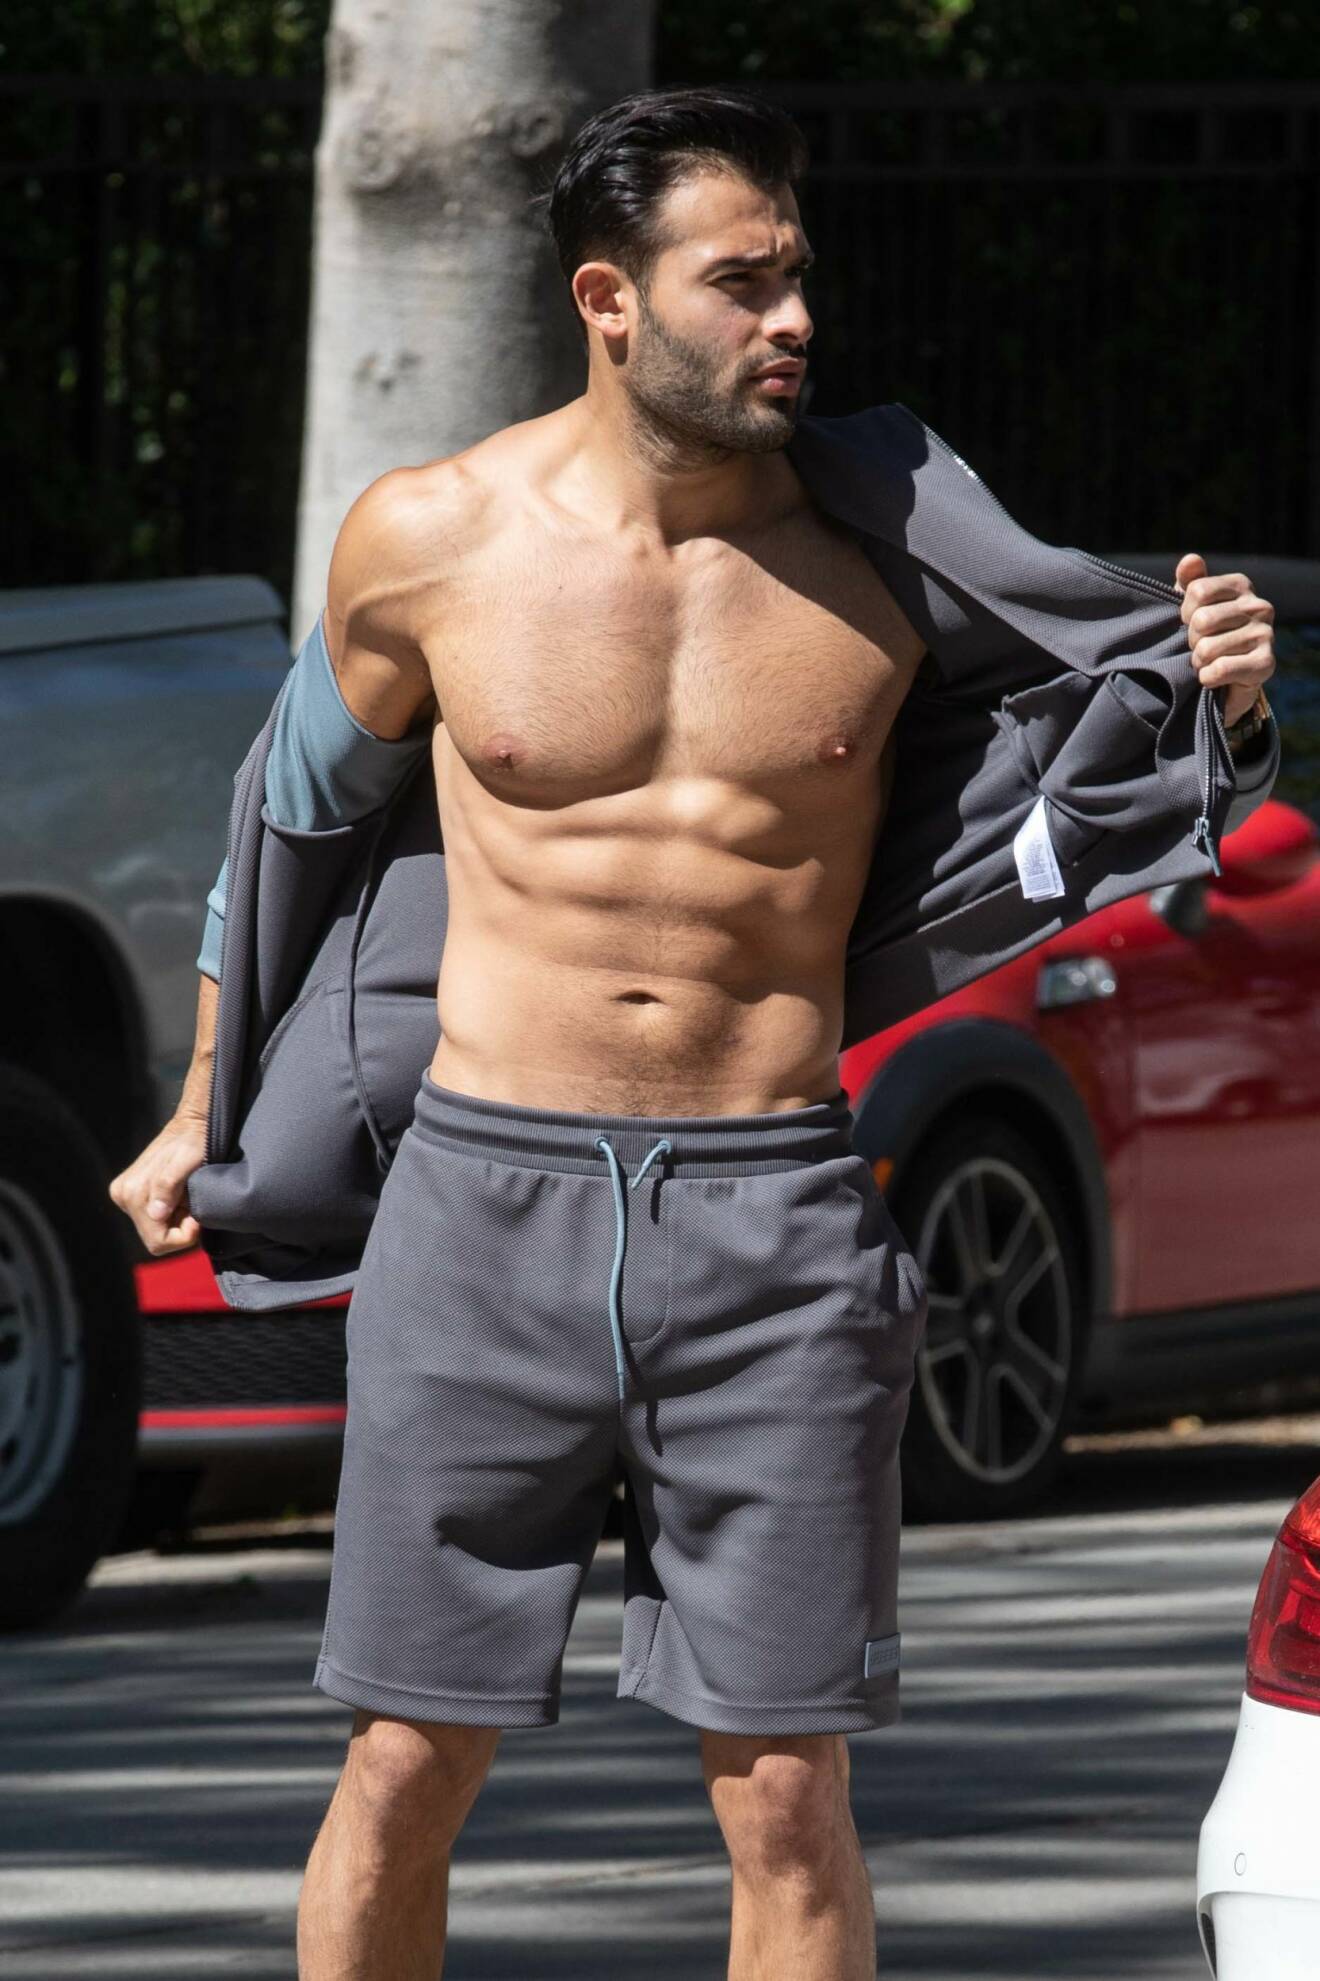 EXCLUSIVE: Britney Spears BF Sam Asghari Shows Off His Crazy Physique Wearing An Extremely Tight Sweater Prior to Working